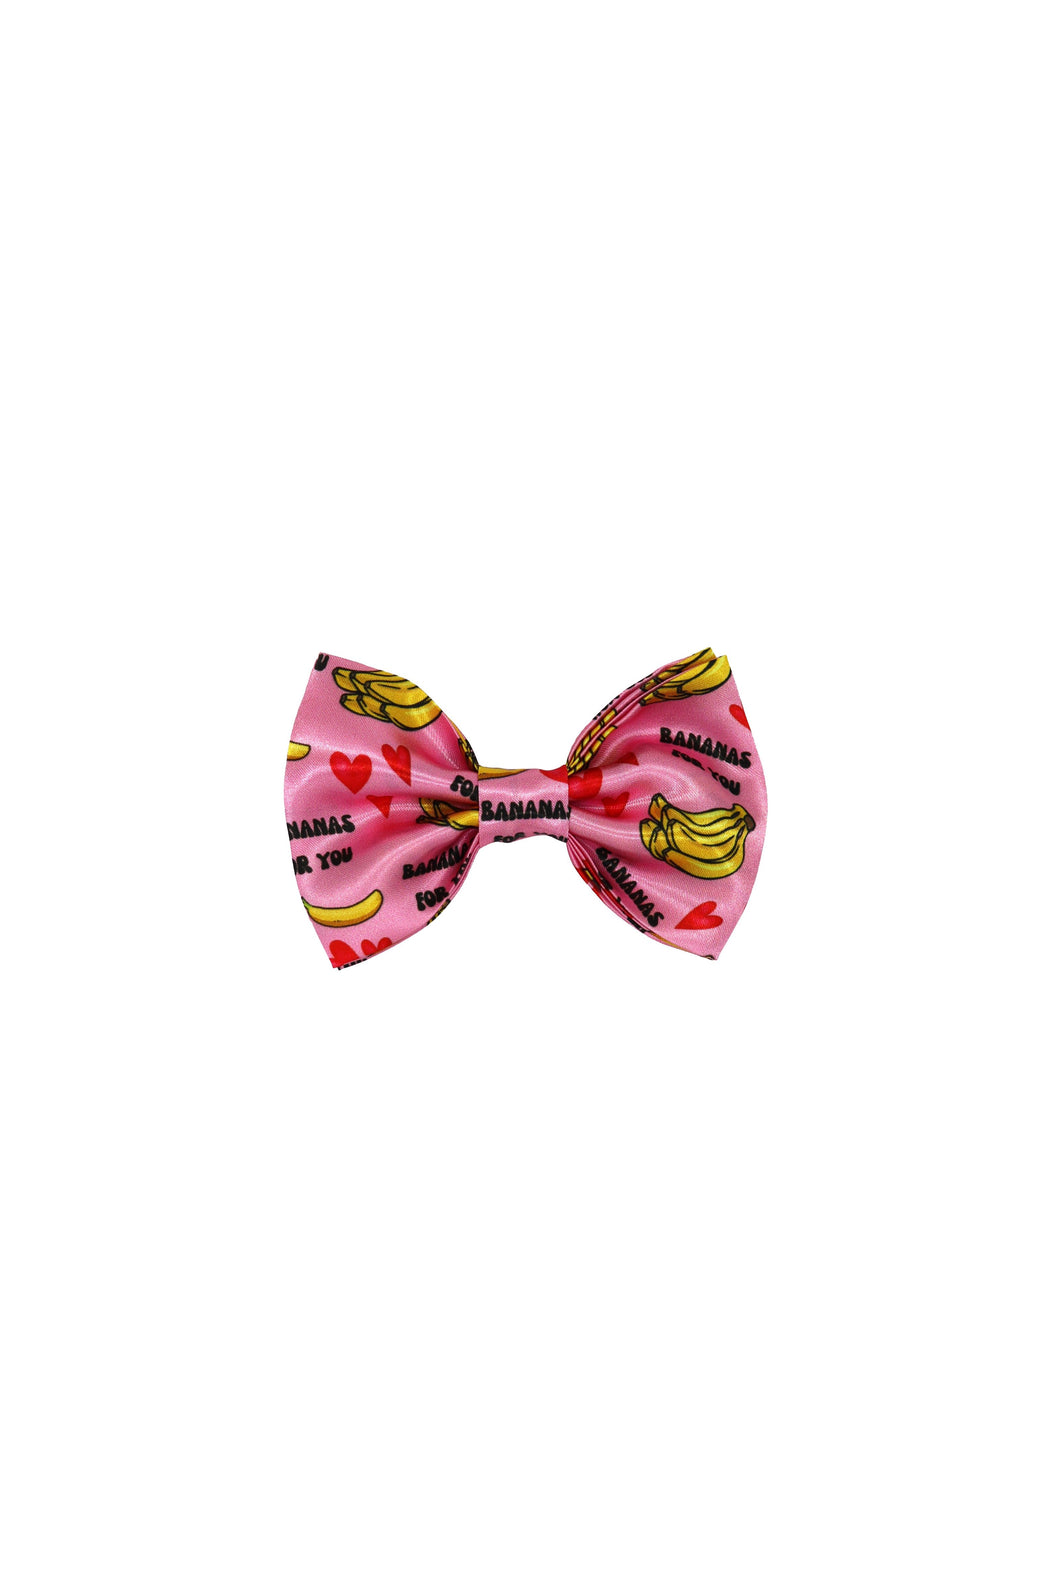 Double Bow Tie - Bananas for You